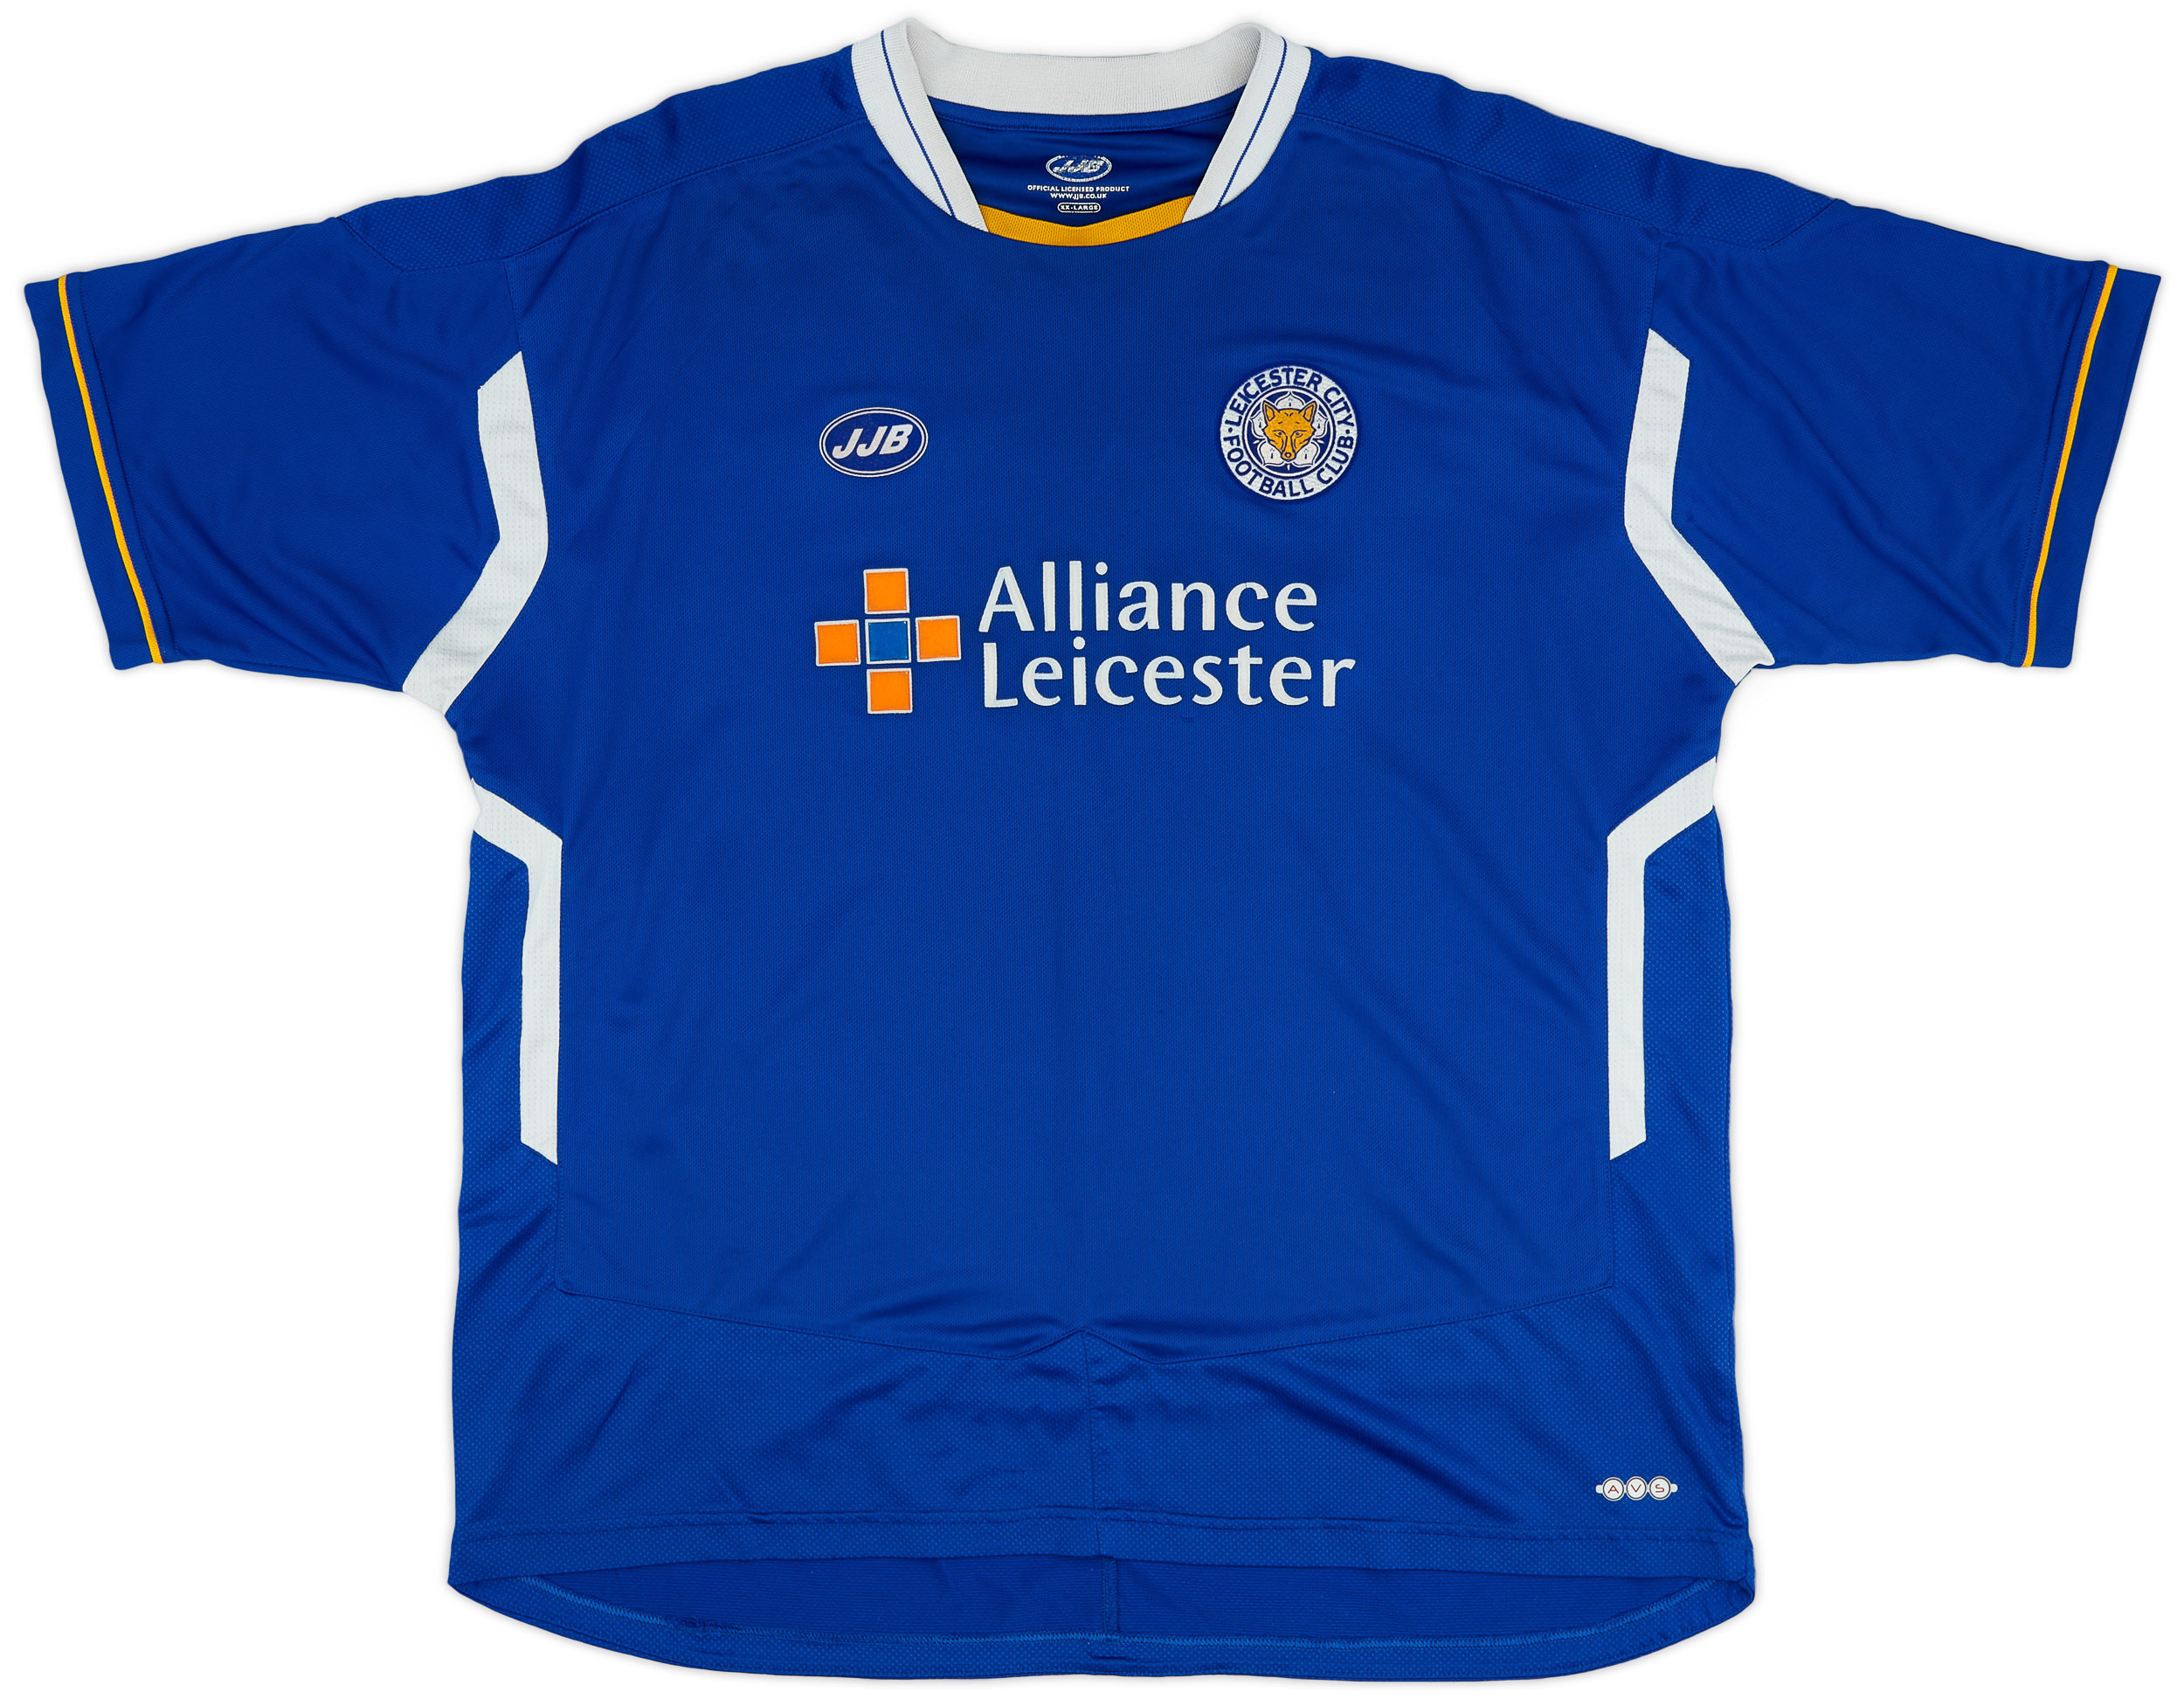 2005-06 Leicester Home Shirt - 8/10 - ()